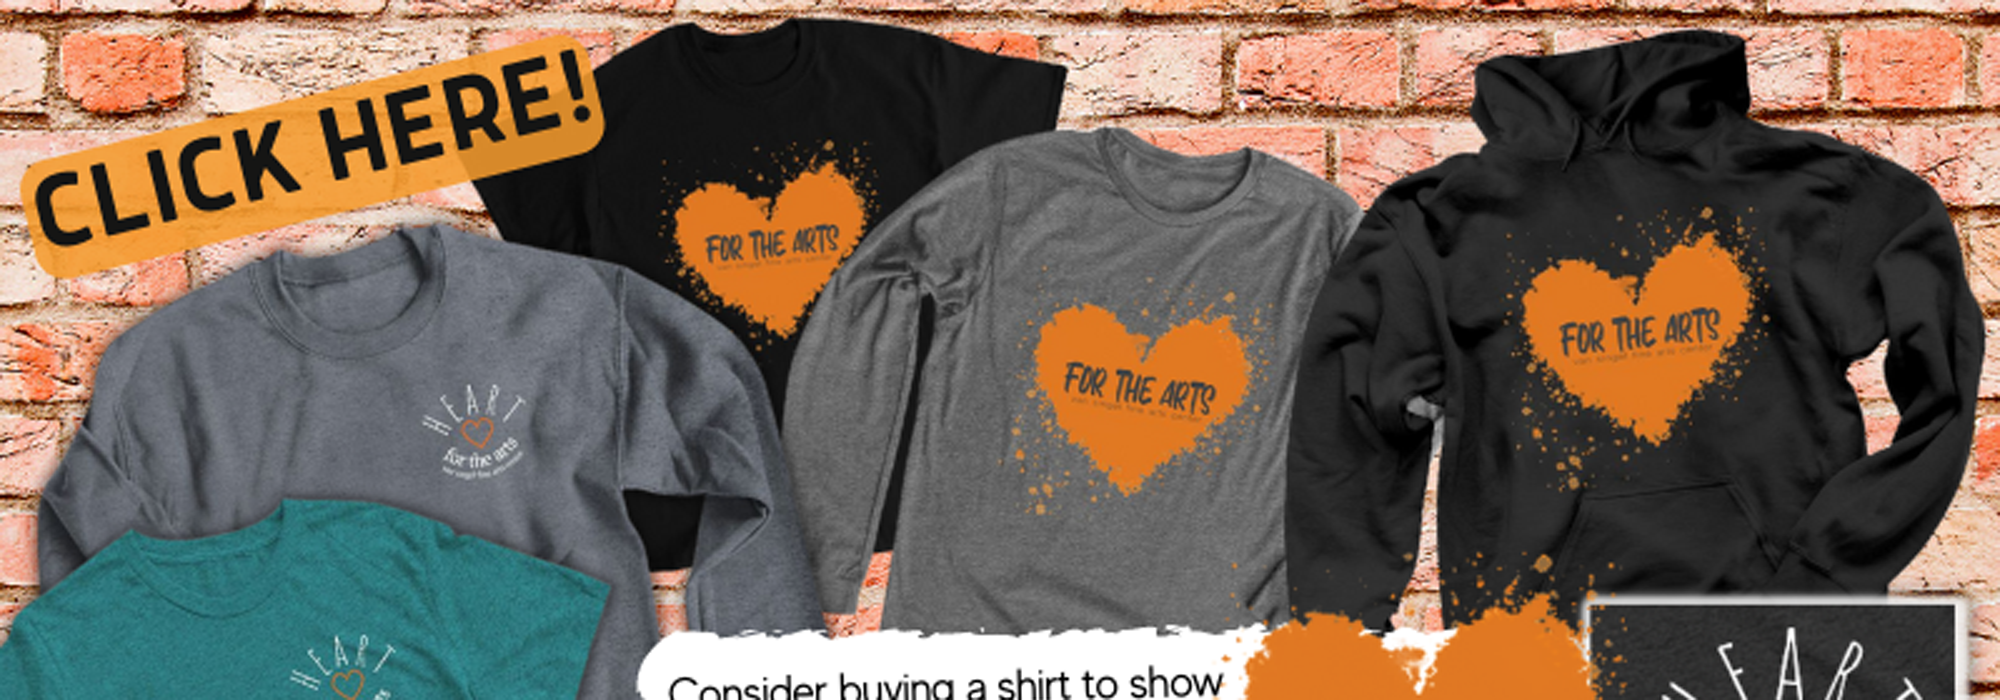 Click here to buy a "Hearts for the Art" shirt, our fundraiser for the Van Singel Foundation!